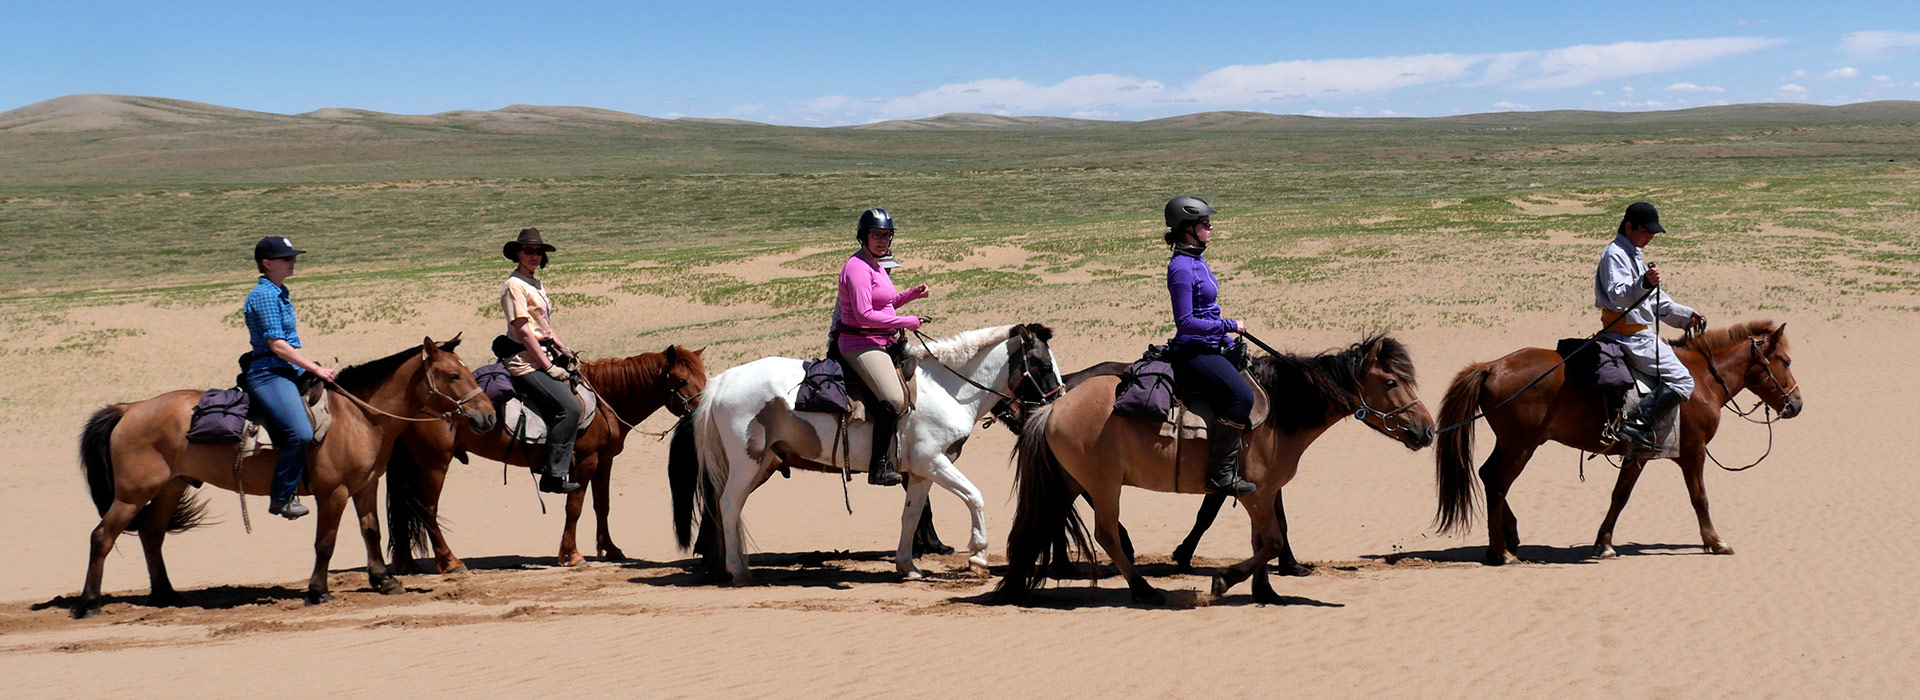 Ride a horse like Mongolian Nomads in East Gobi Steppe